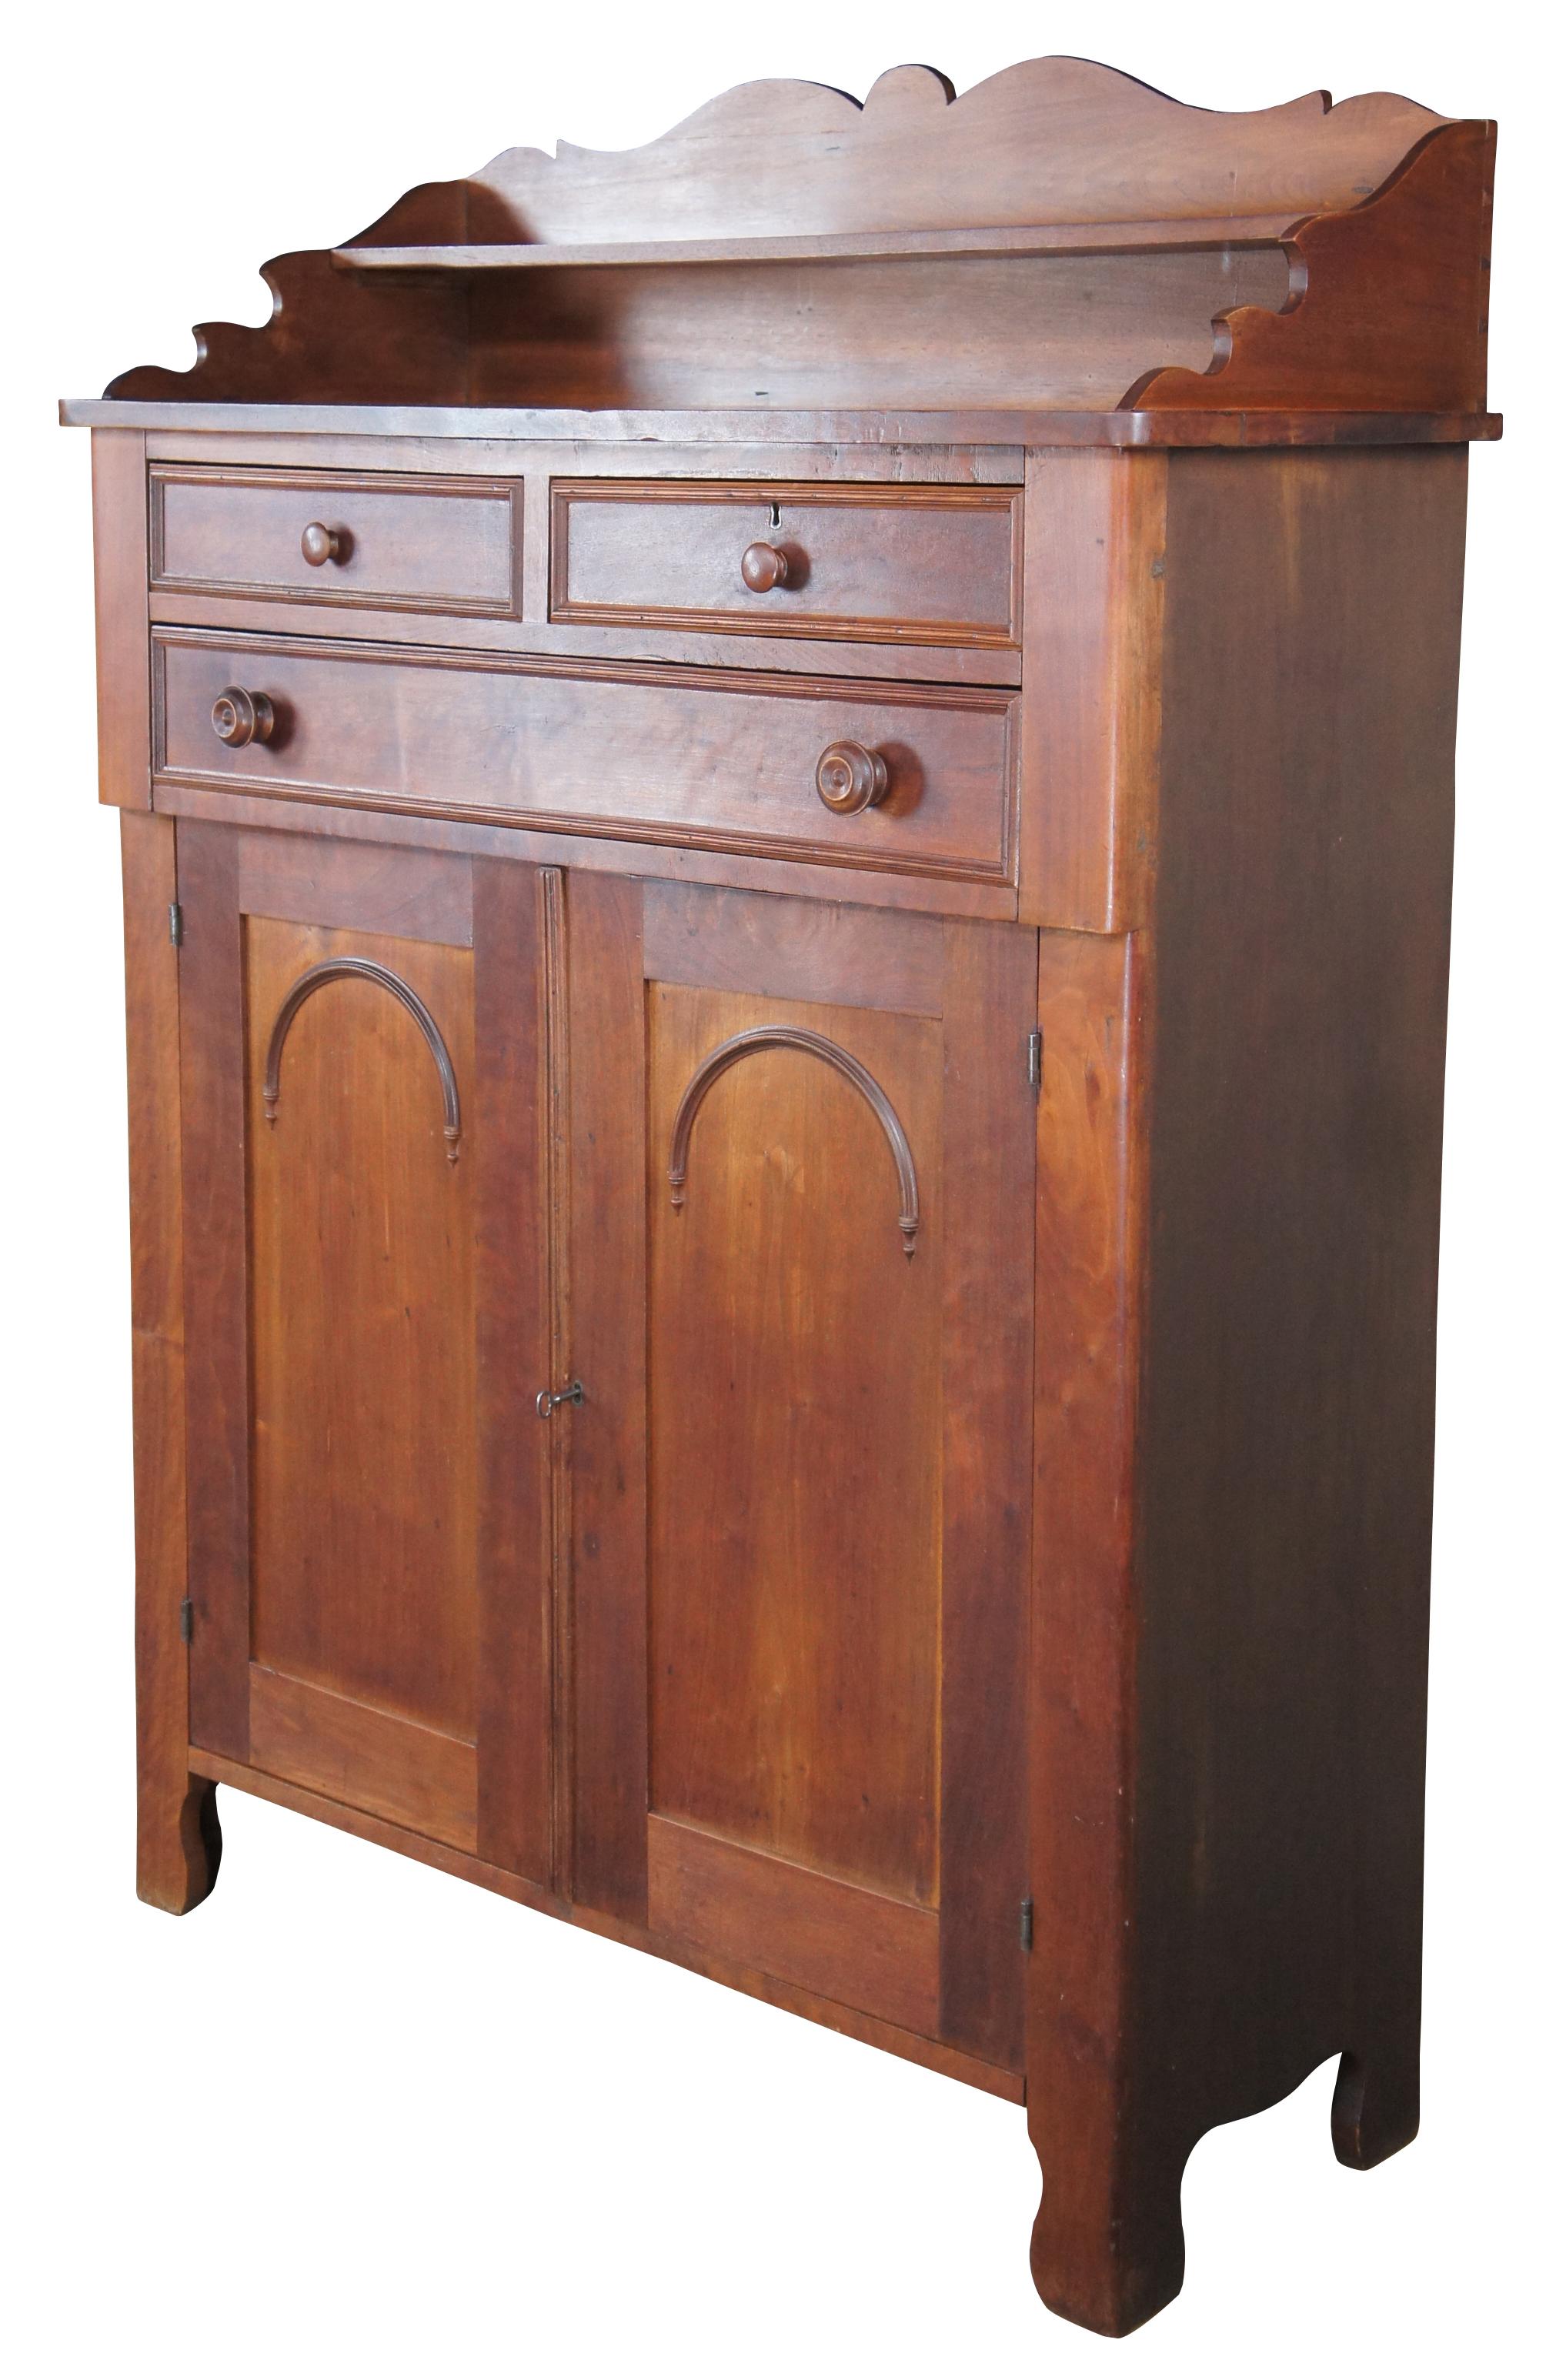 A warming handmade mid 19th century Early American jelly cabinet or pantry cupboard. A rectangular form made from American Walnut with an upper surface enclosed by a serpentine backsplash that features one shelf, over three hand dovetailed drawers